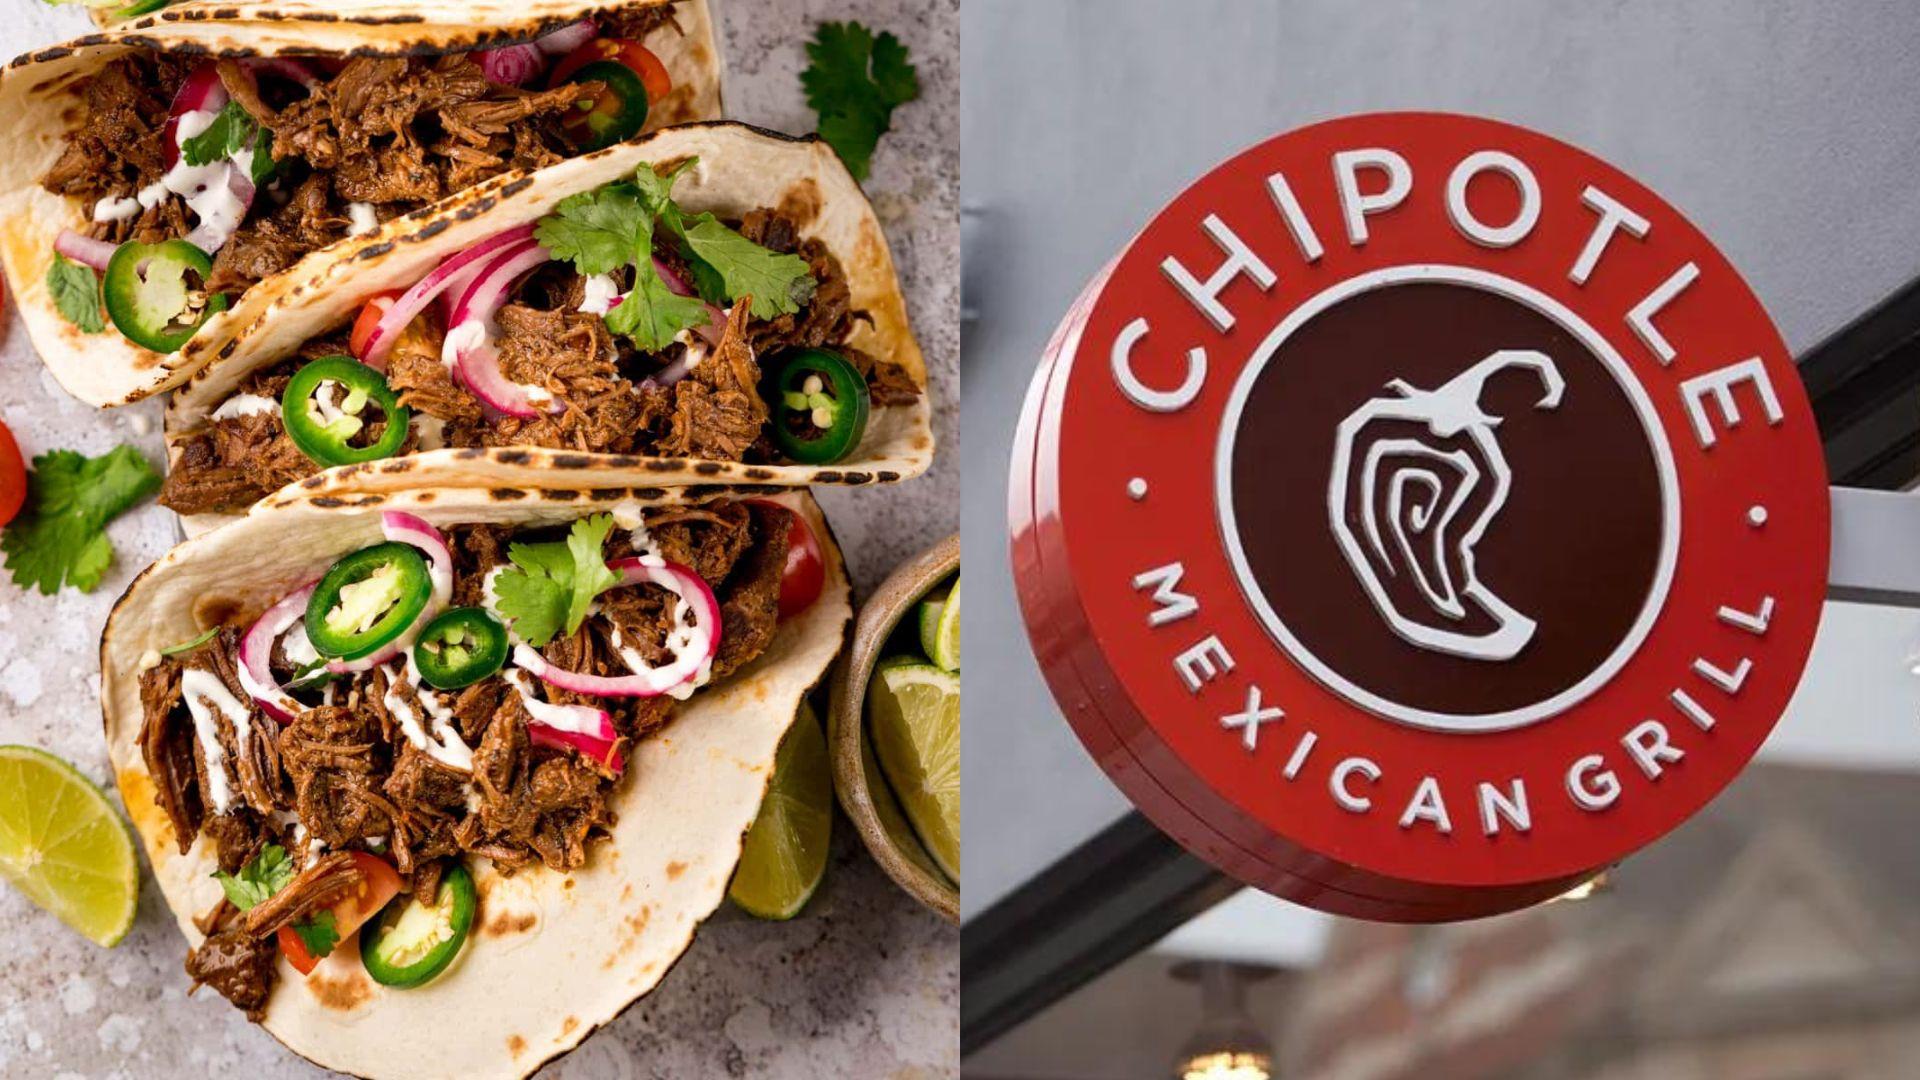 Chipotle logo and beef tacos